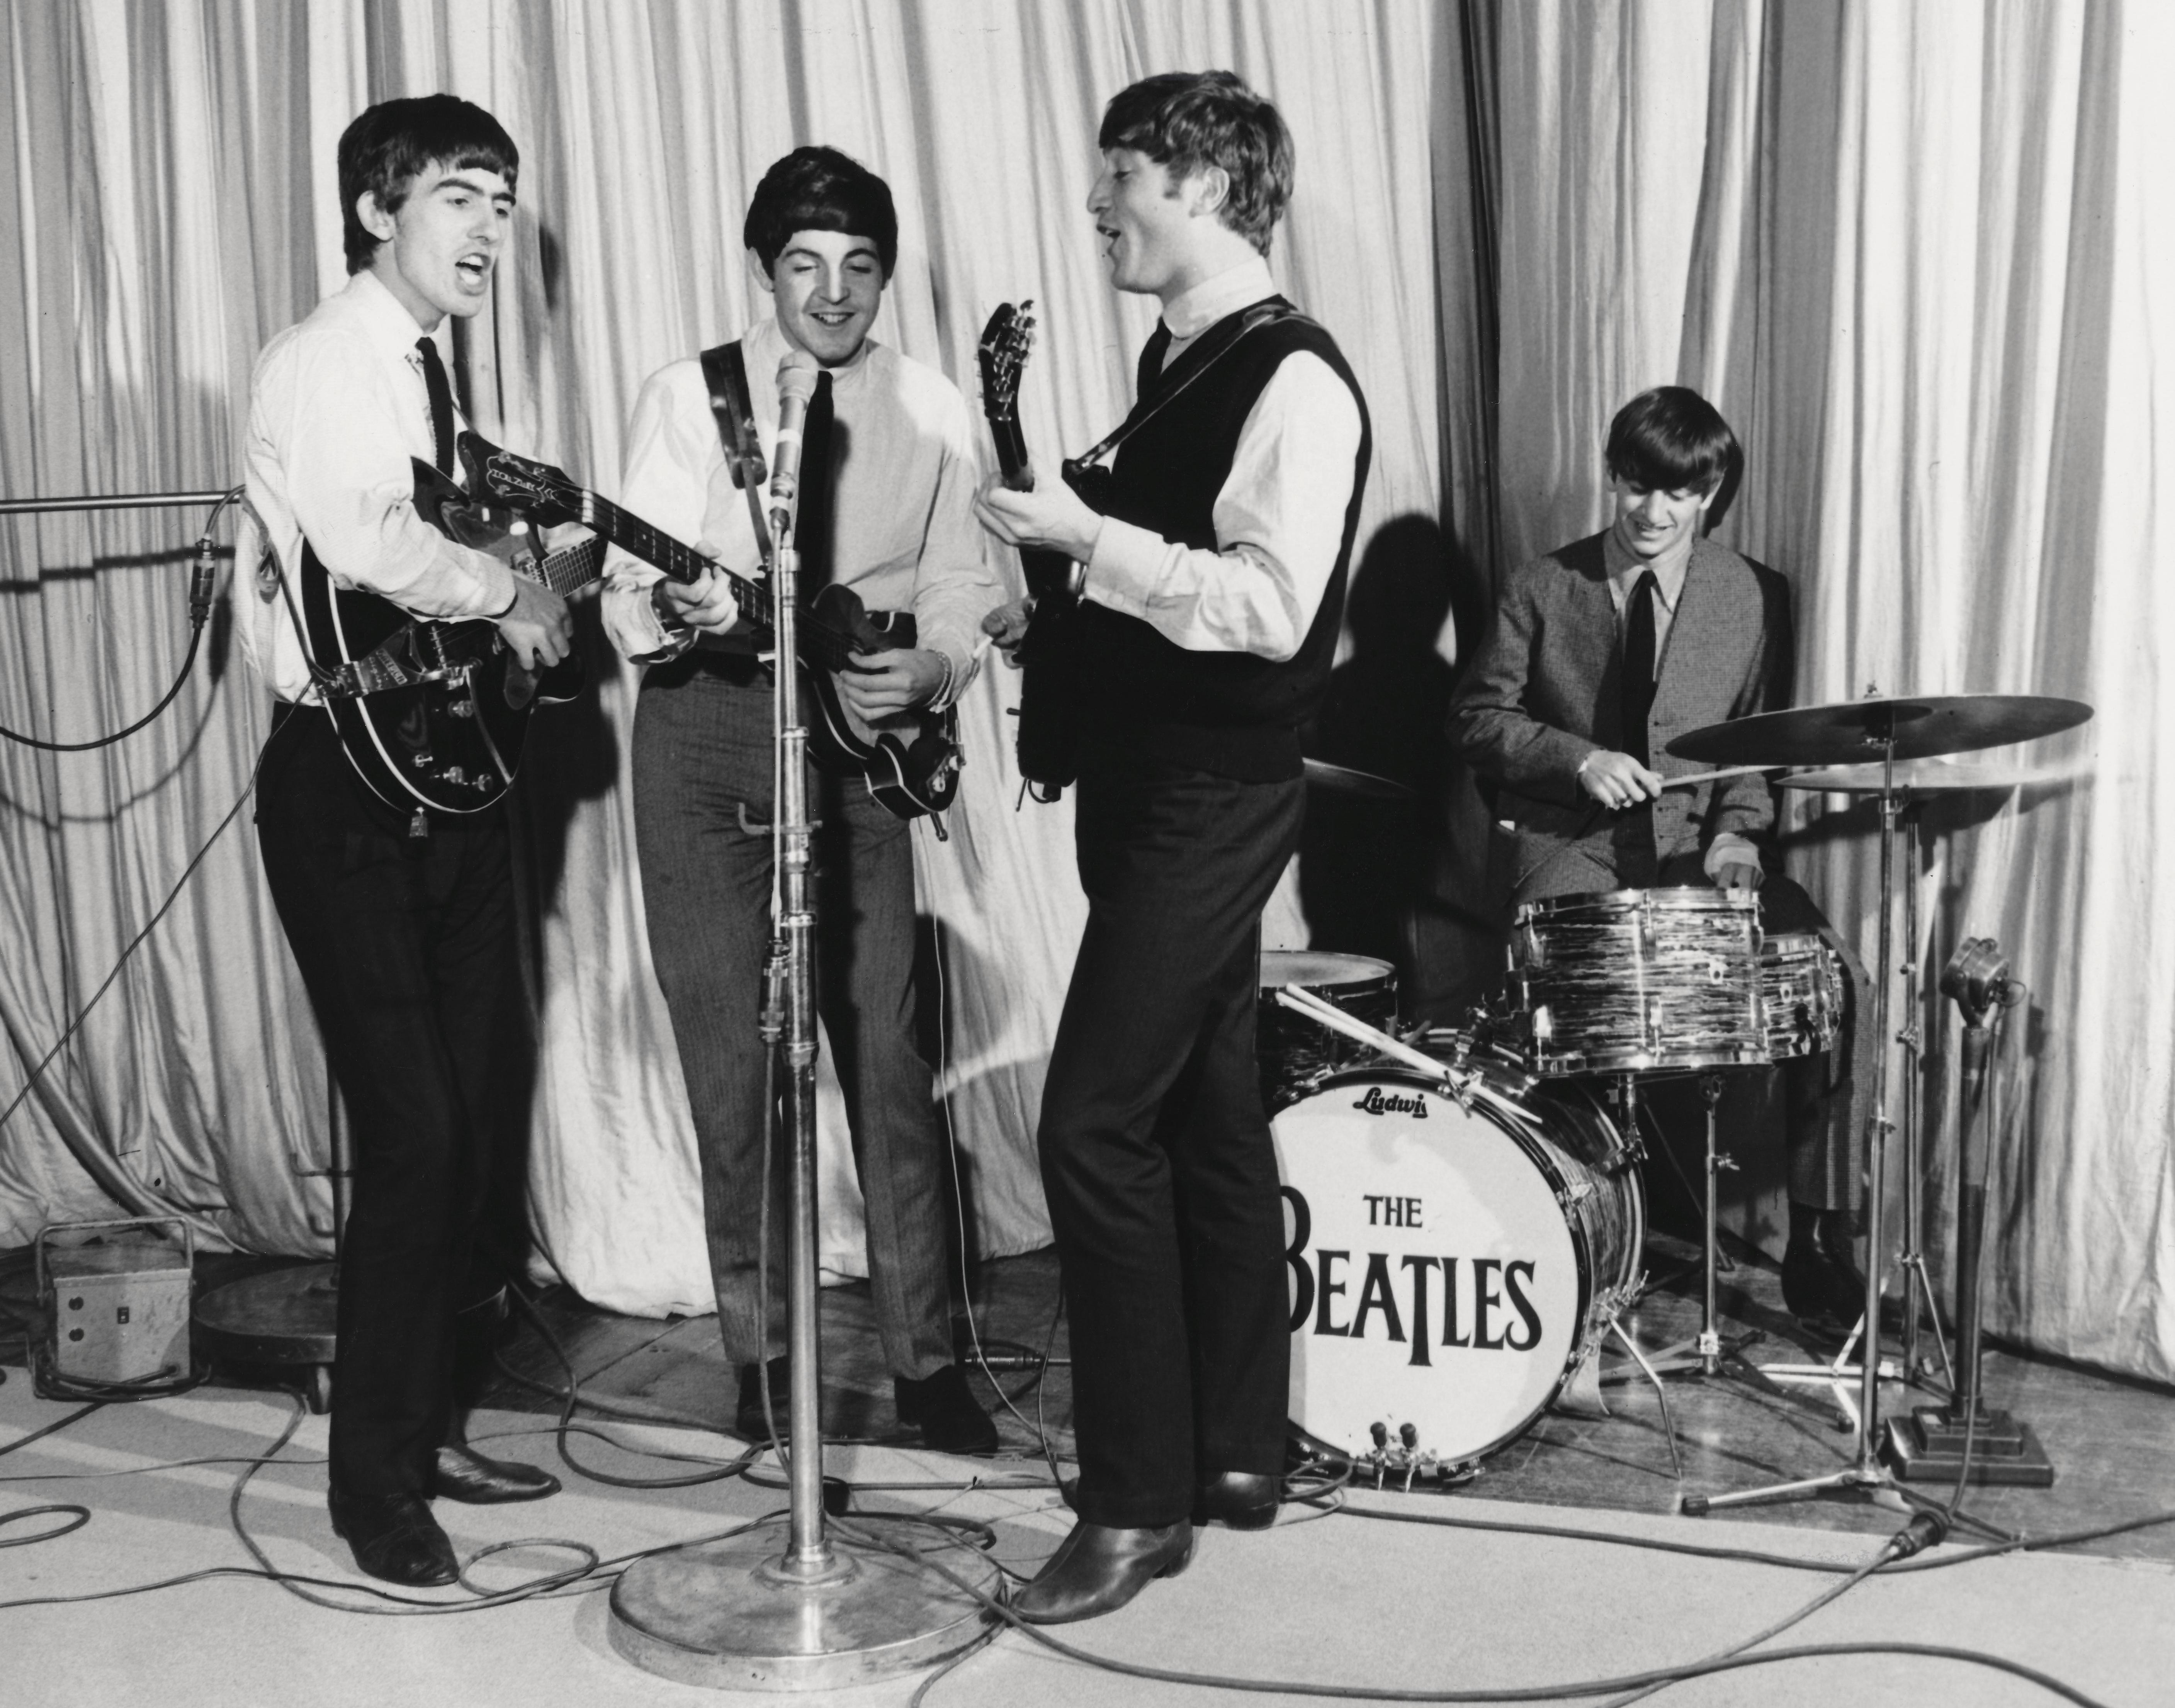 Unknown Black and White Photograph - The Beatles Performing in the Early Years Globe Photos Fine Art Print